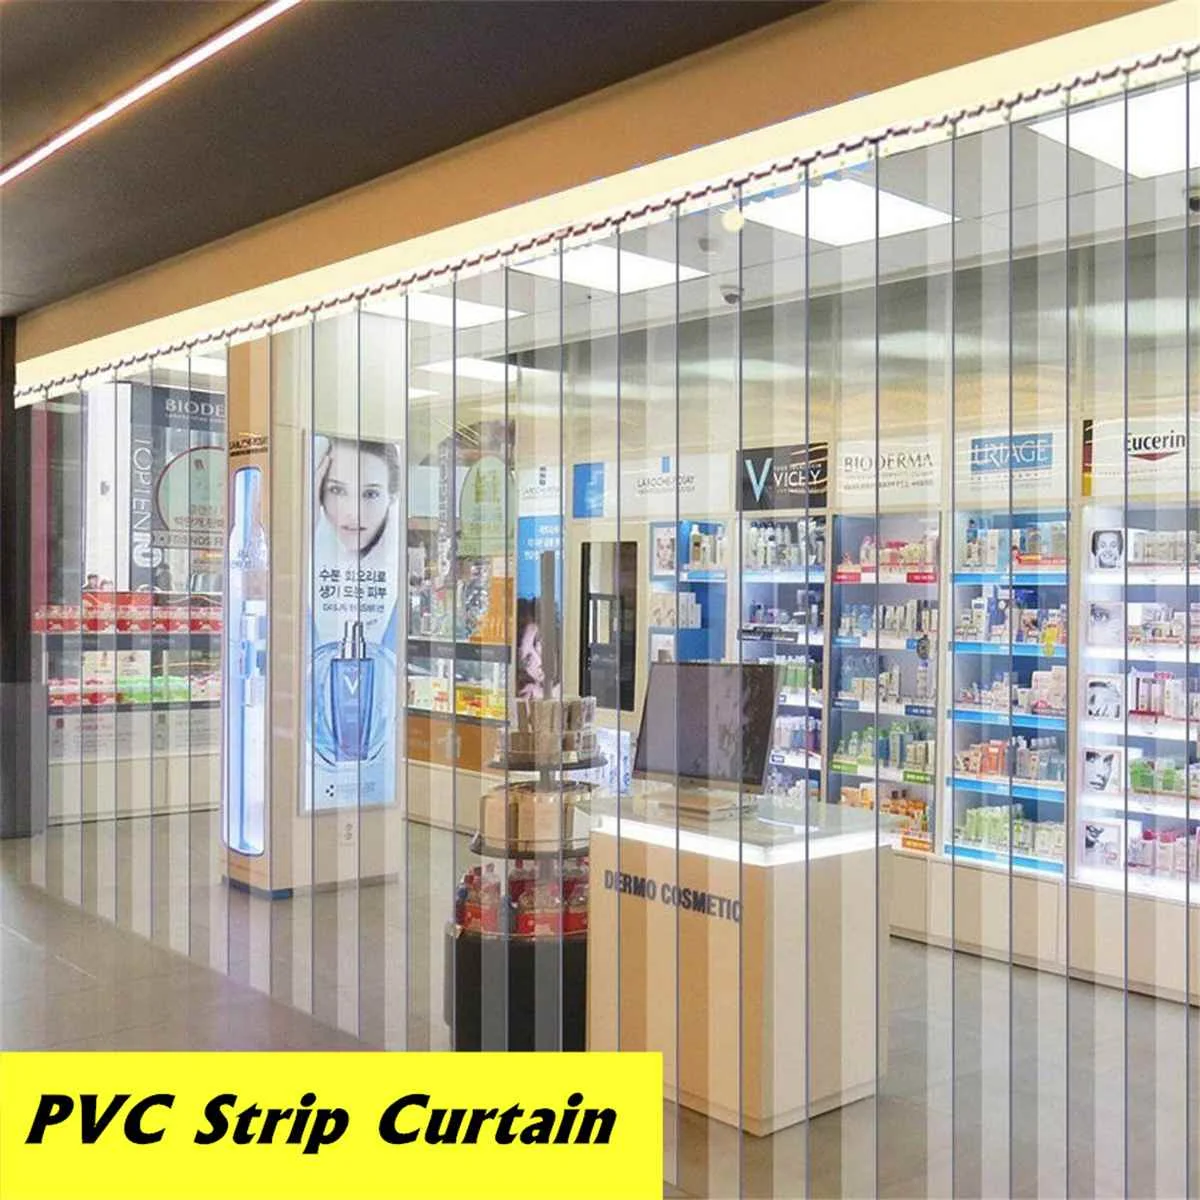 300 PVC Strip Curtain Door 2.5 M x 2 M for coldroom warehouse Catering 